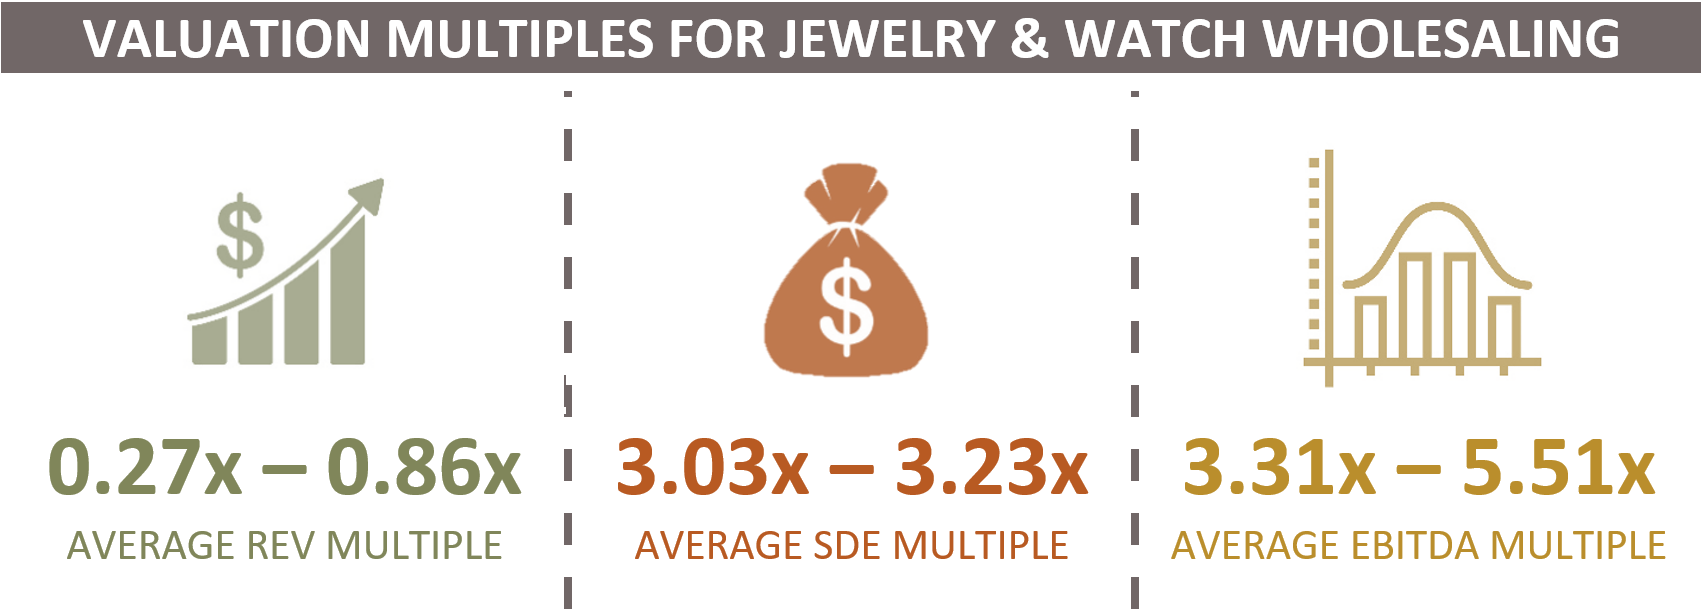 Valuation Multiples For Jewelry & Watch Wholesaling